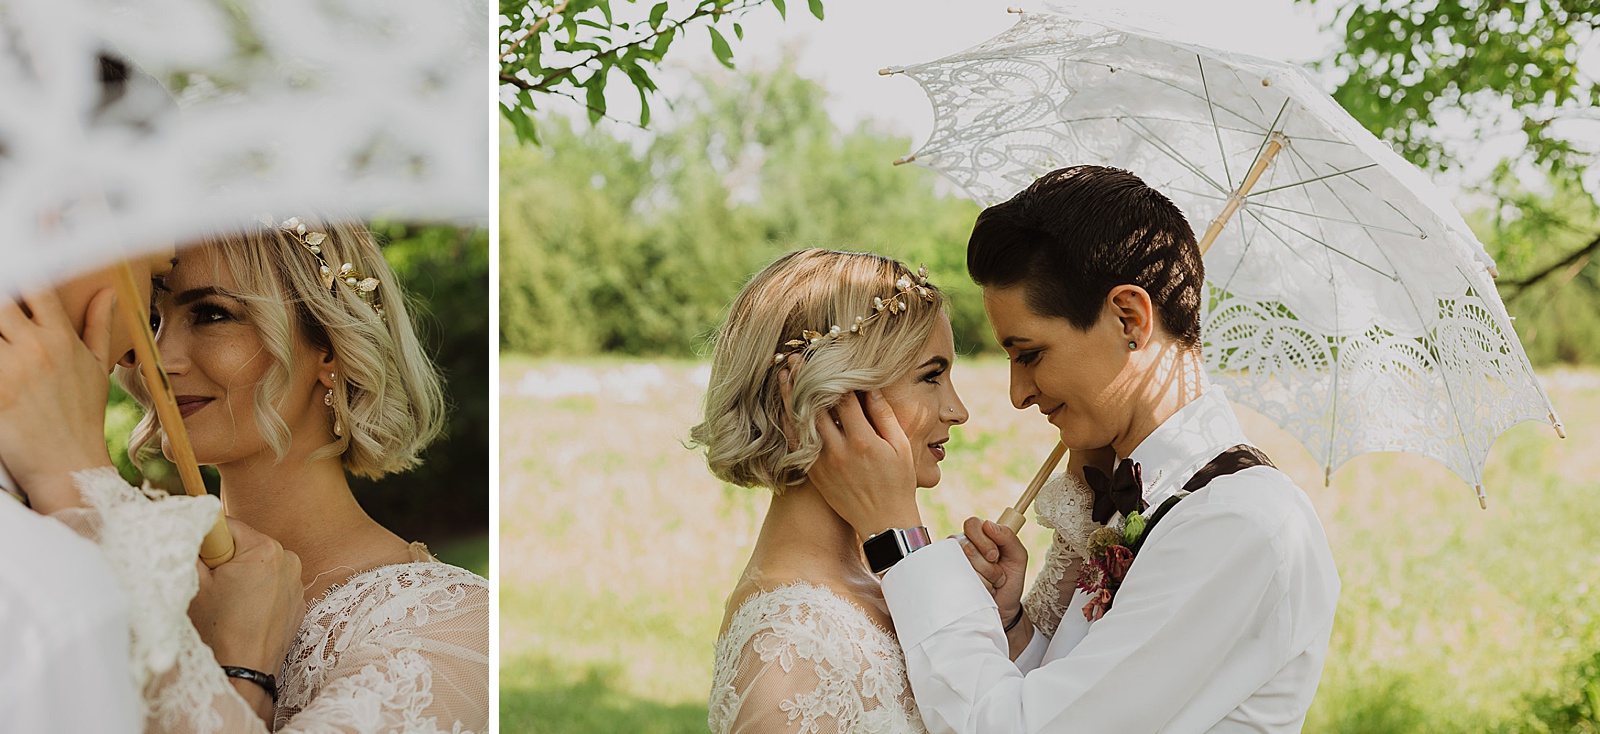 Newlywed Portraits Boho Kansas City Styled Elopement captured by Caitlyn Cloud Photography